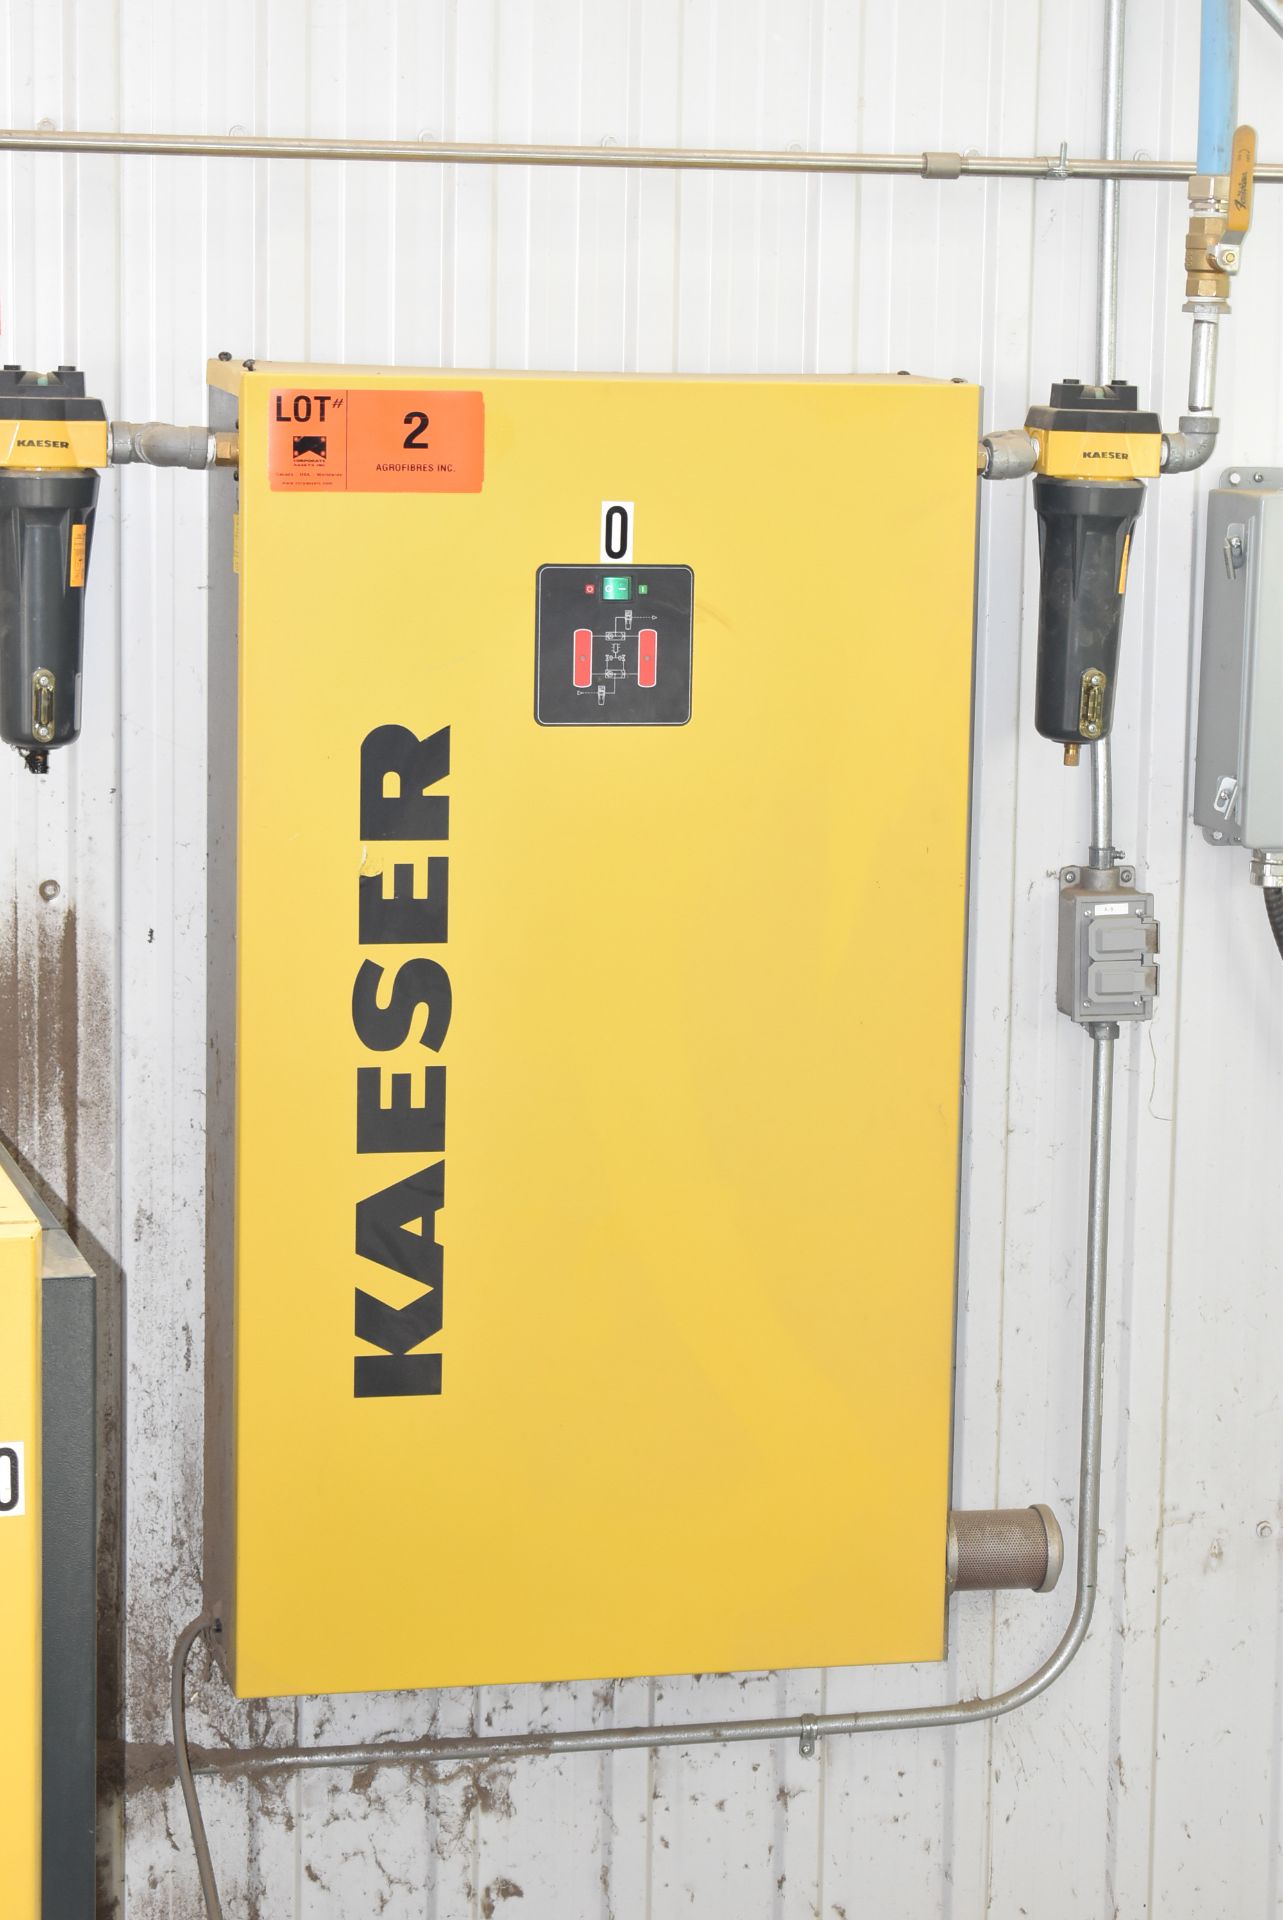 KAESER WALL-MOUNTED IN-LINE DIGITAL AIR DRYER, S/N: N/A (CI) [RIGGING FEE FOR LOT #2 - $50 CAD